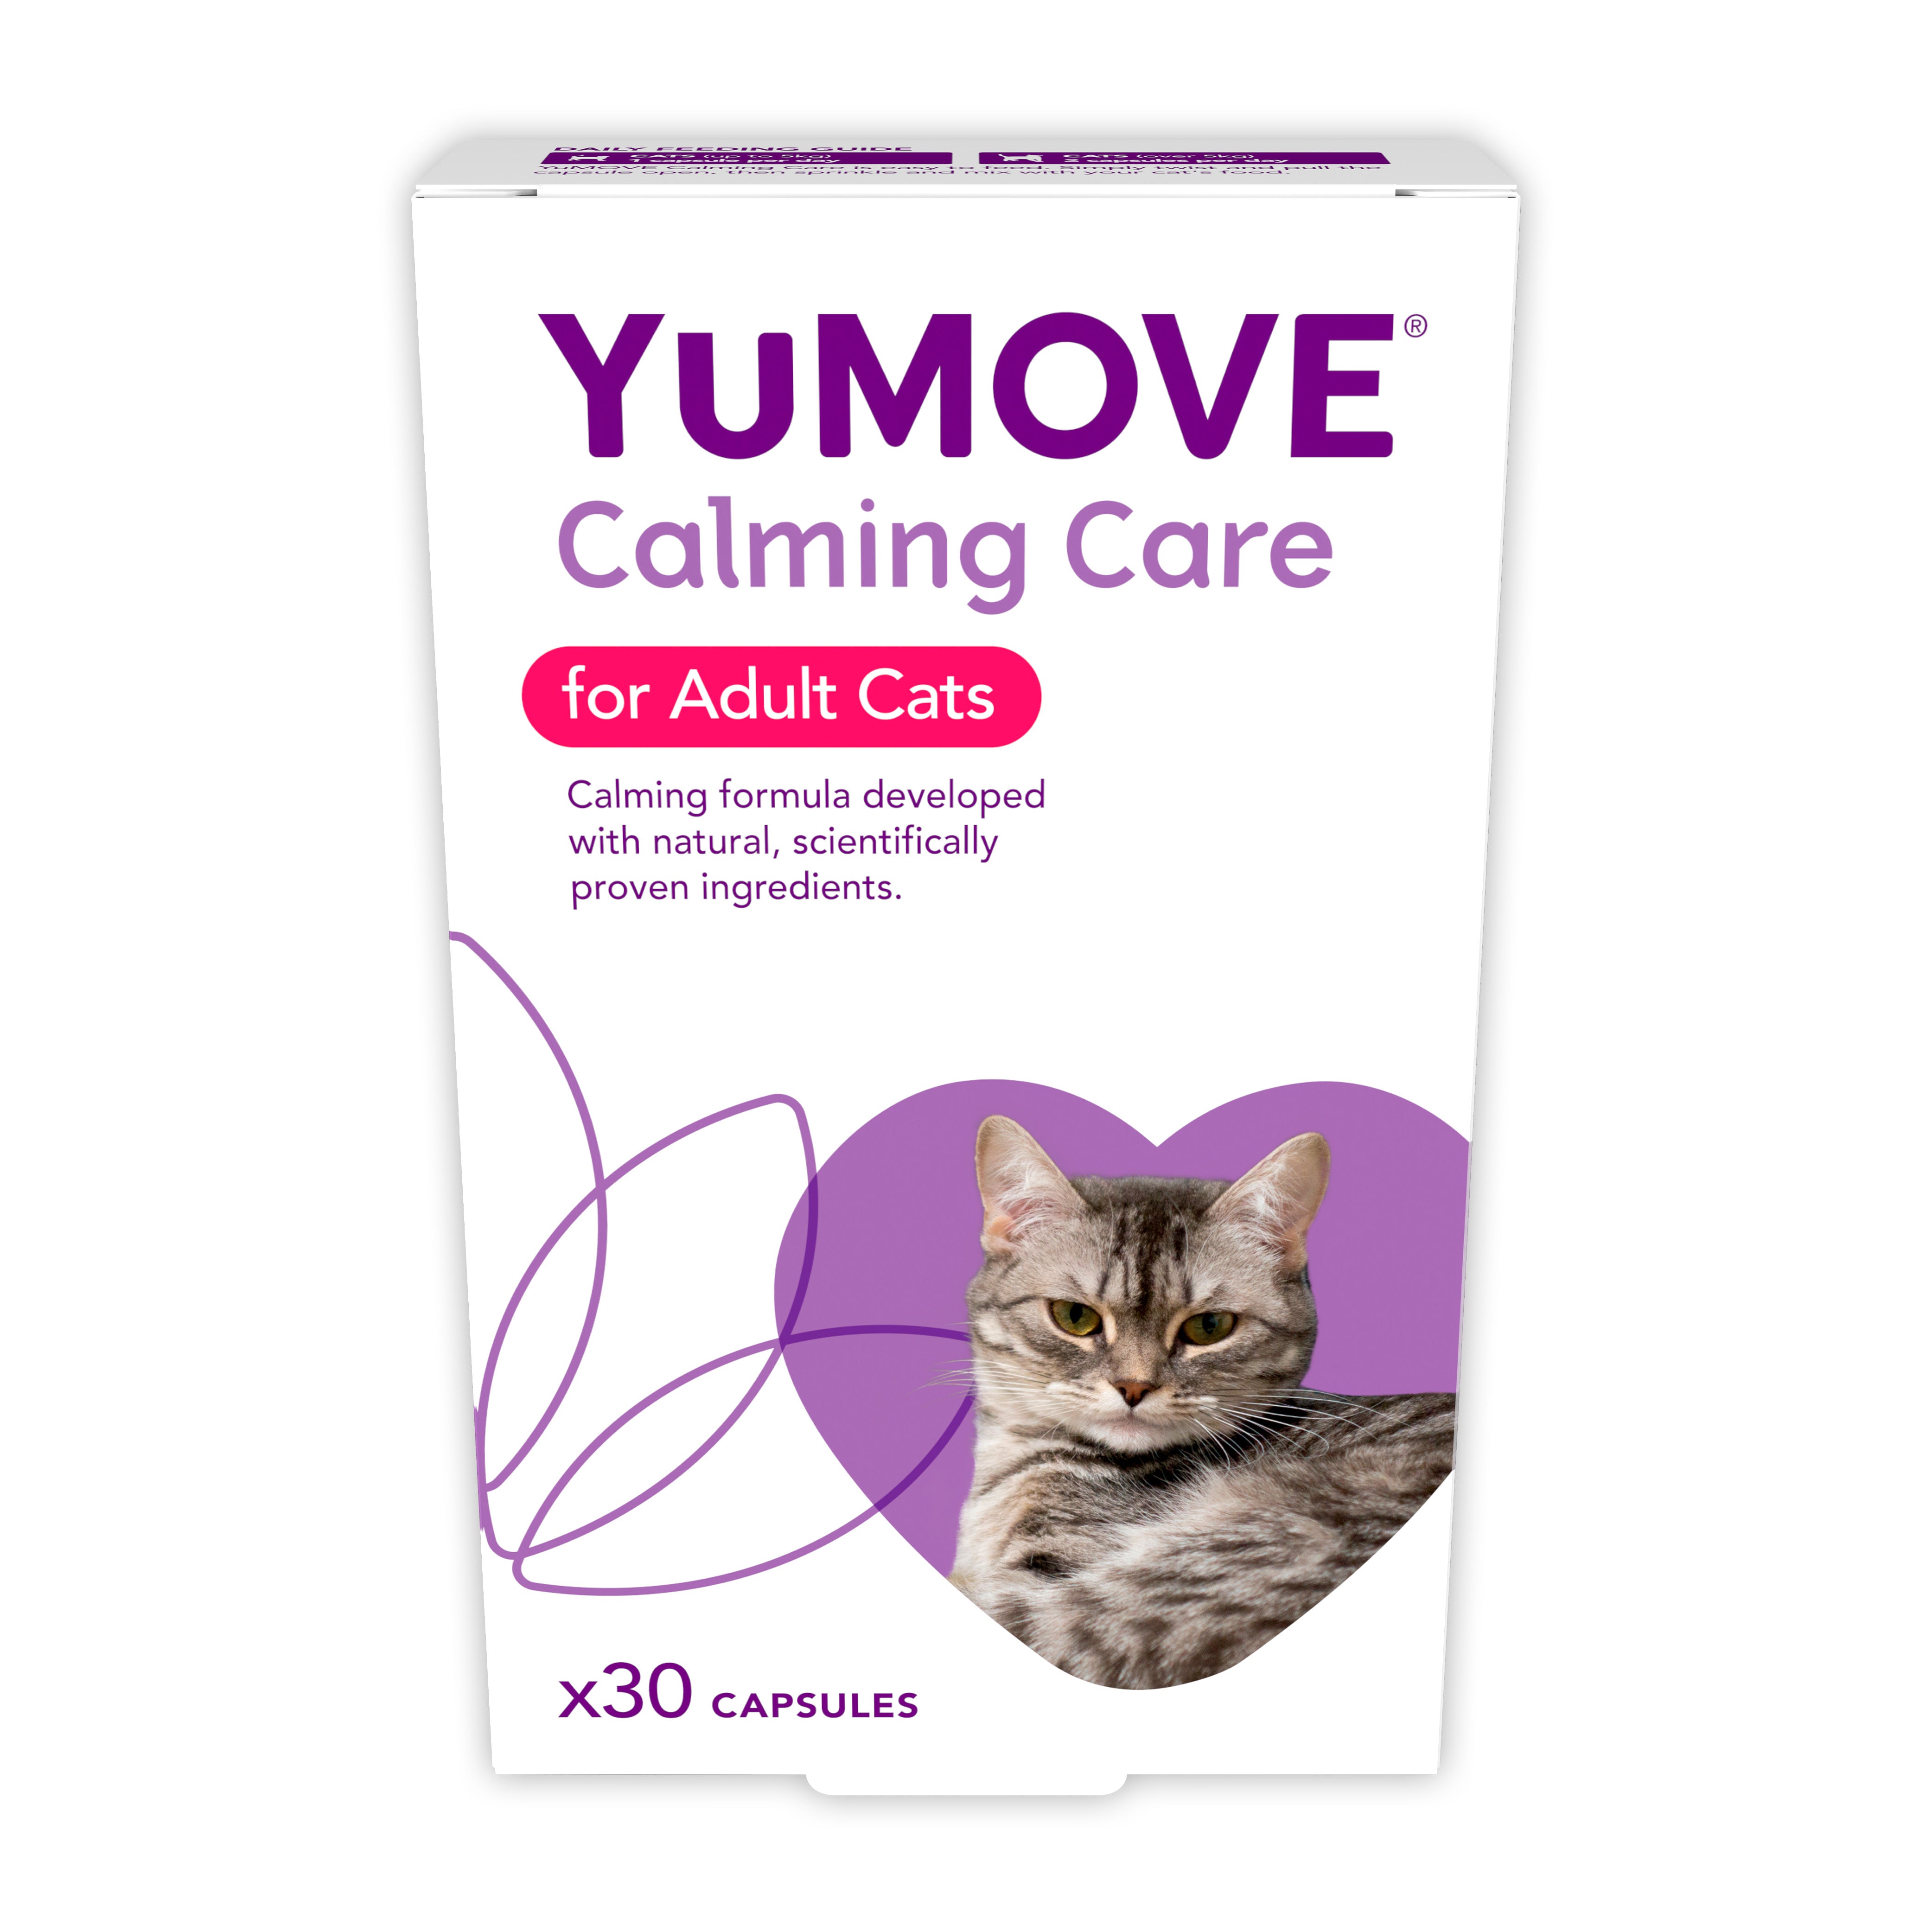 YuMOVE Calming Care for Adult Cats